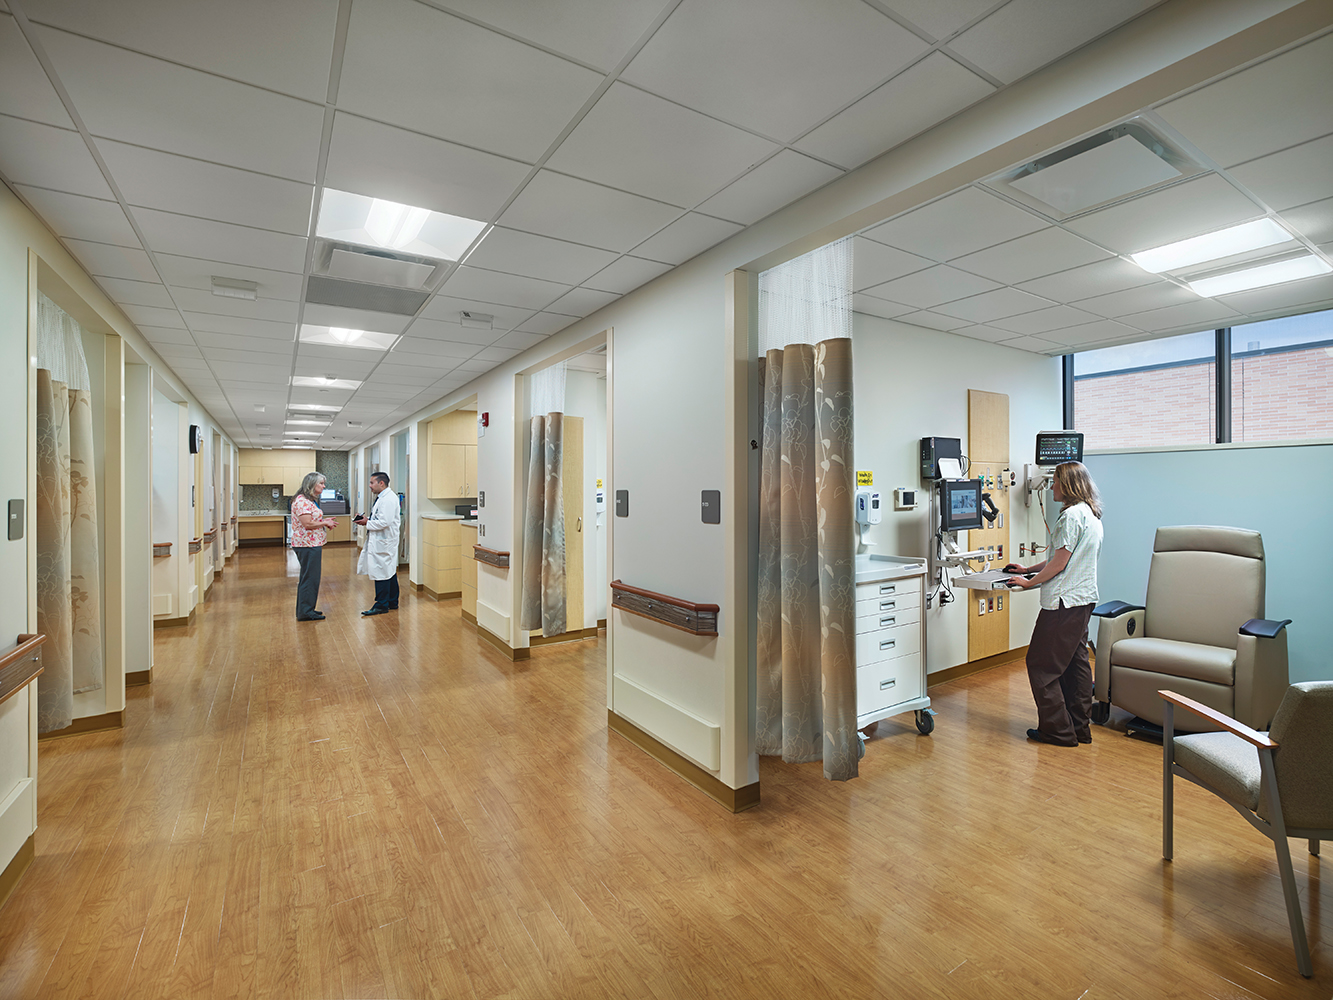 Unity medical lighting over an exam area in a wide emergency room corridor.